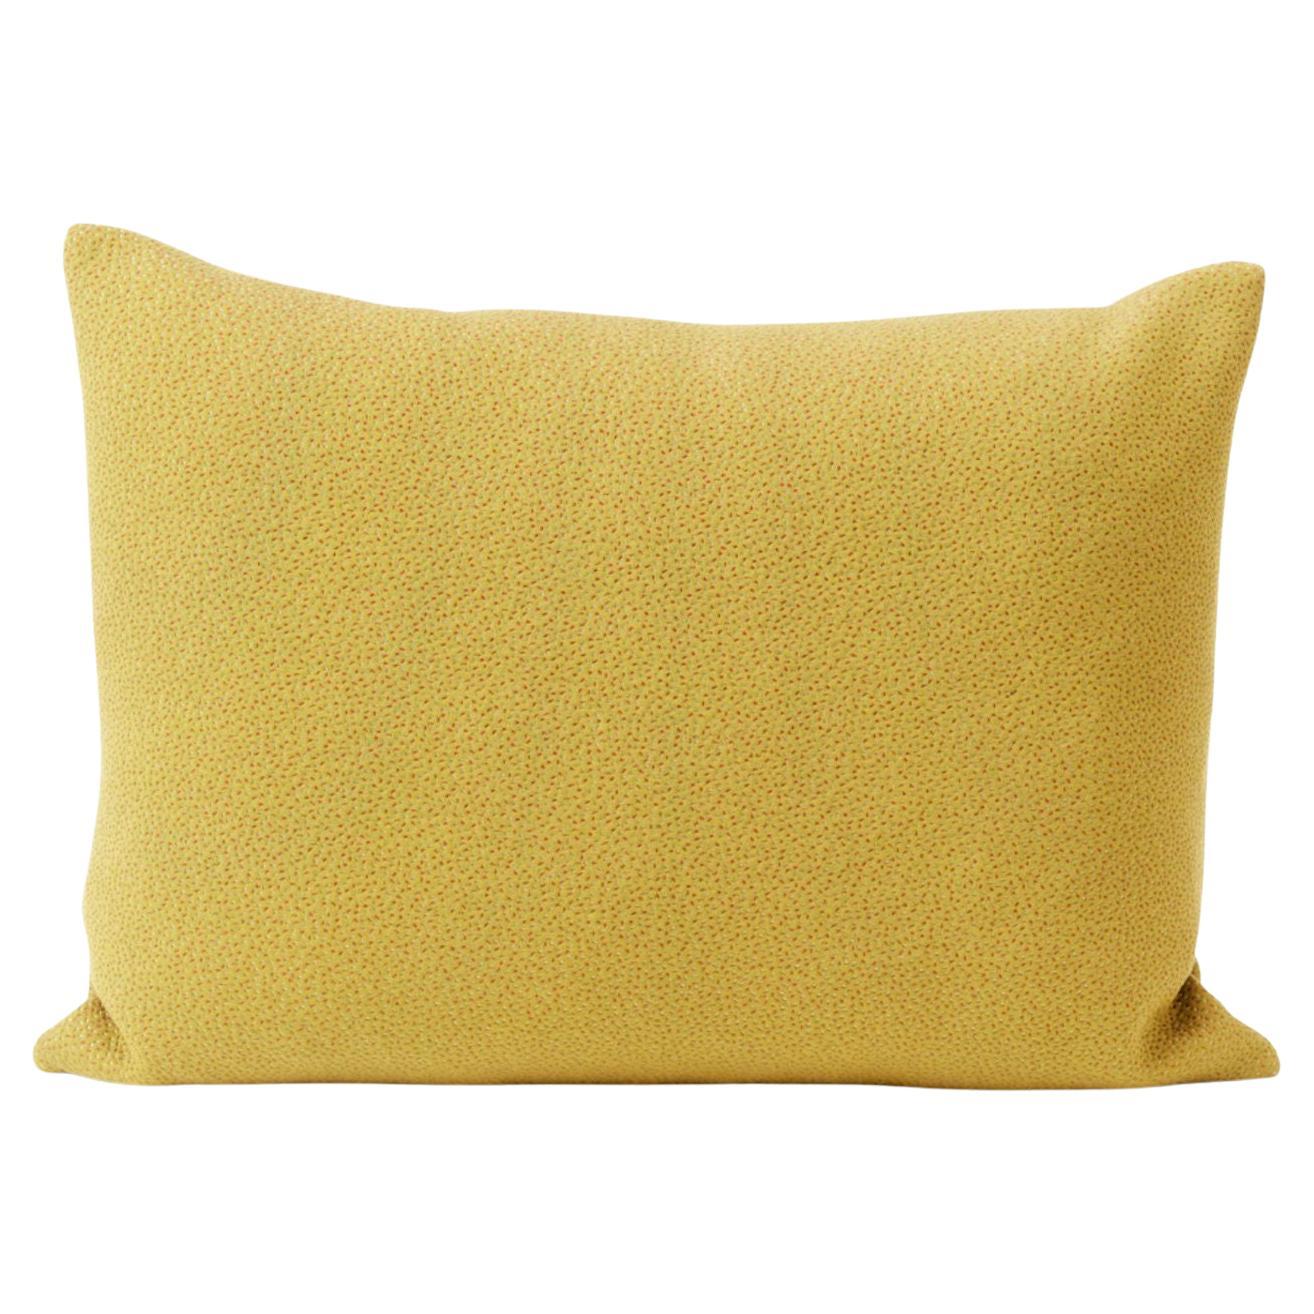 Galore Cushion Square Sprinkles Desert Yellow by Warm Nordic For Sale